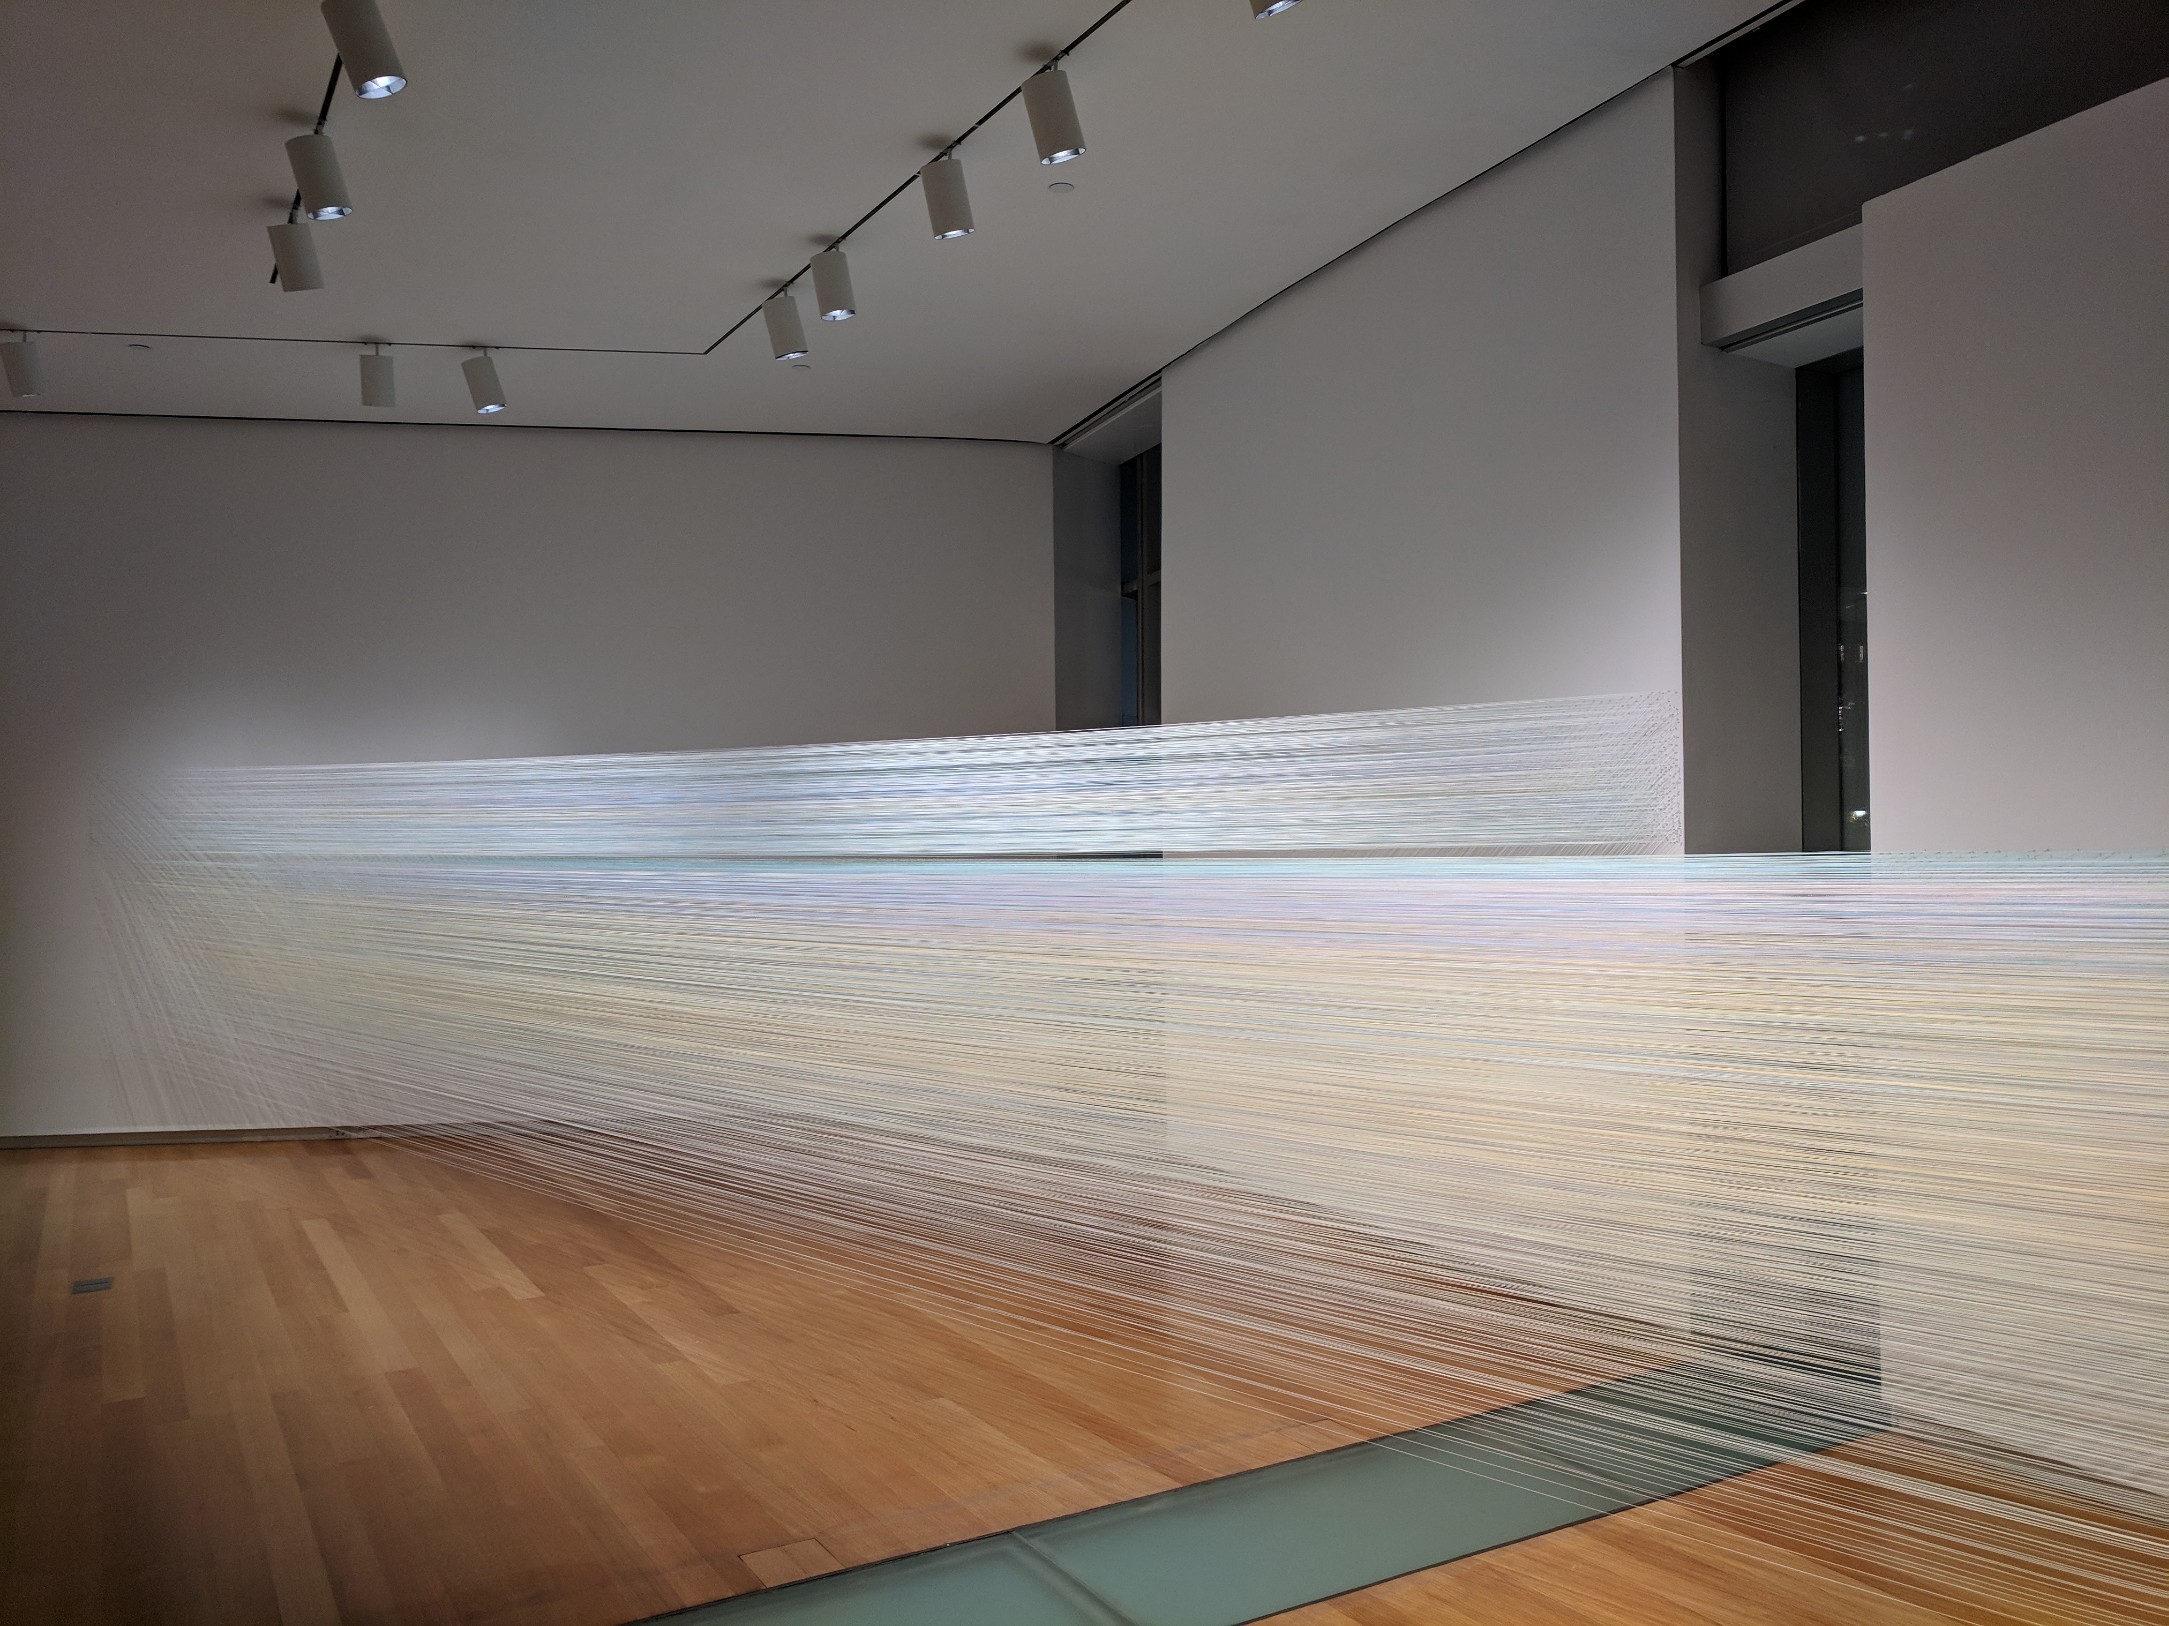     the eye’s level   2018 cotton thread and staples 5 x 56 x 18 feet photograph by Bill Haw (taken at night) 